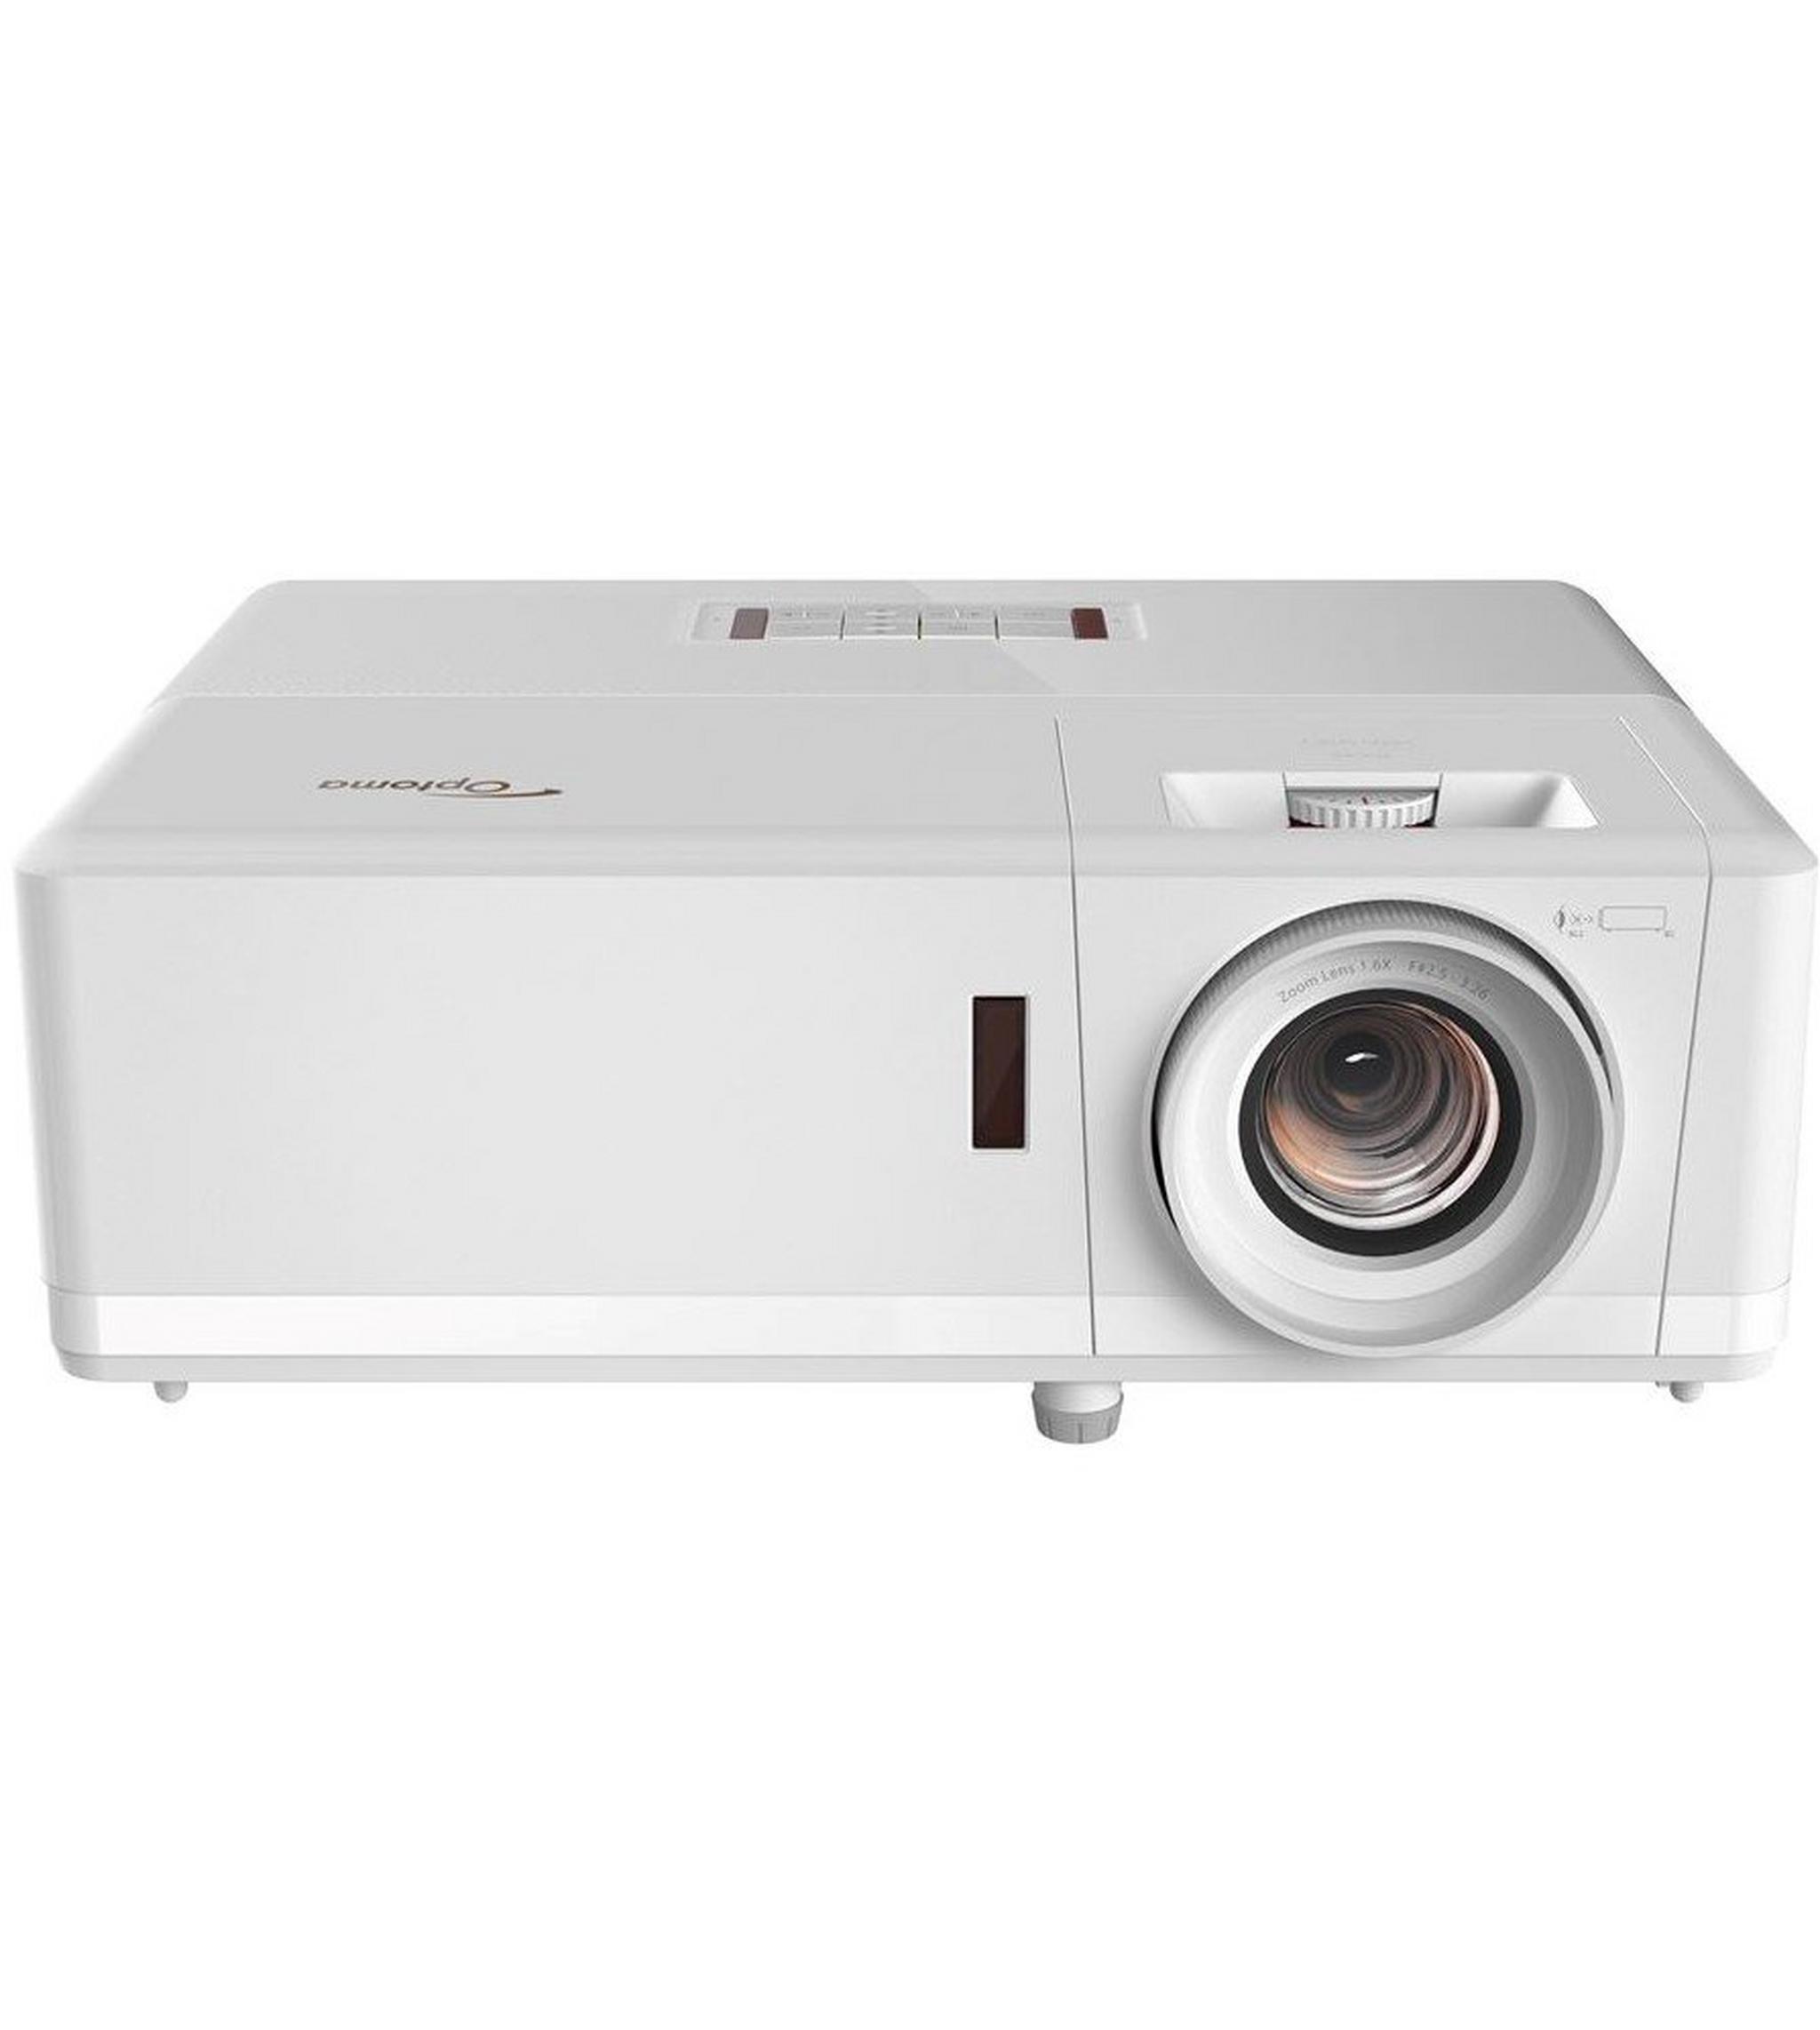 OPTOMA Compact Laser Projector, Zh507 – White